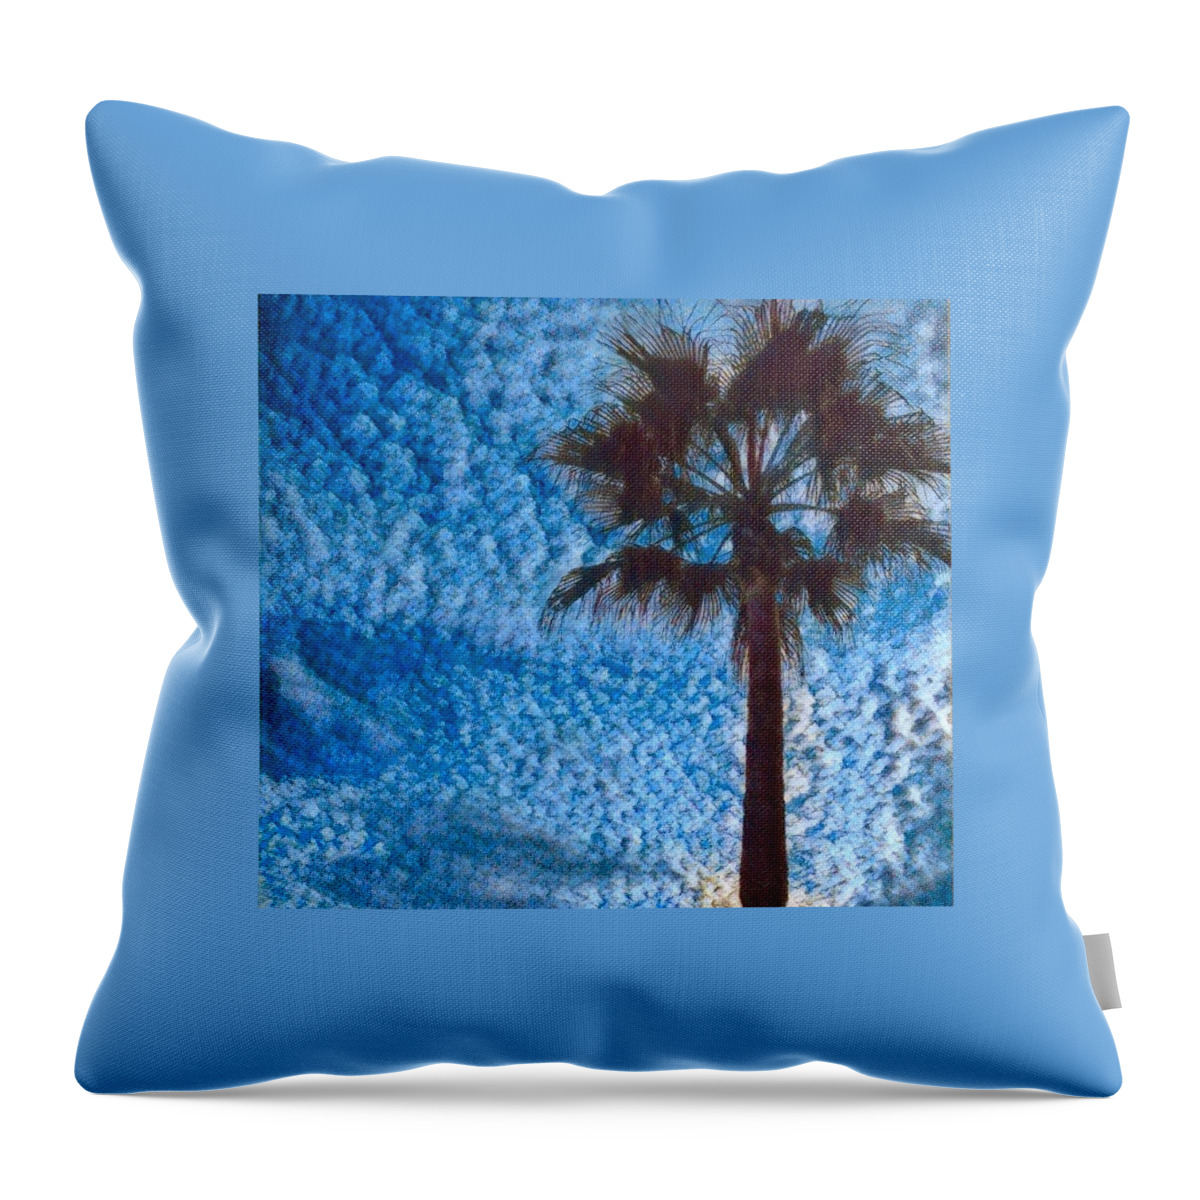 Colette Throw Pillow featuring the photograph Fine Day in Spain by Colette V Hera Guggenheim